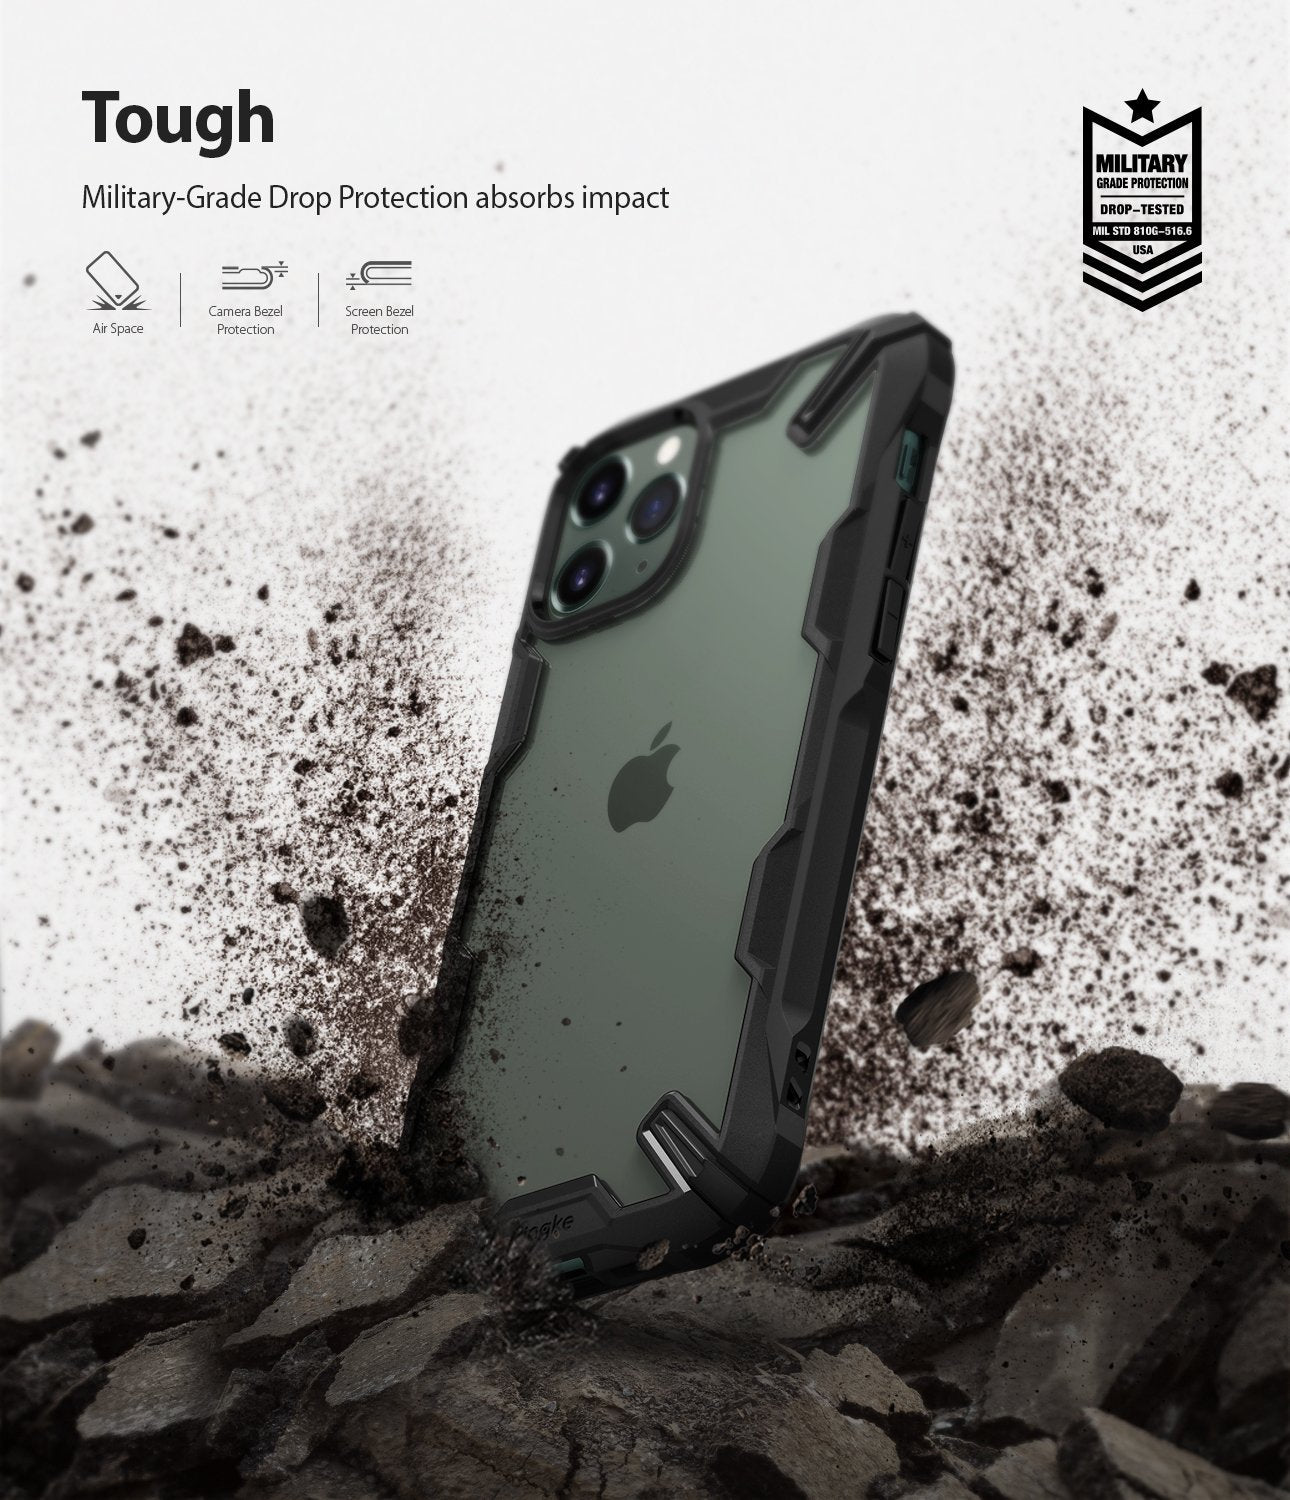 Ringke Fusion X Designed for apple iPhone 11 Pro MAX Case Black tough drop protection military protection